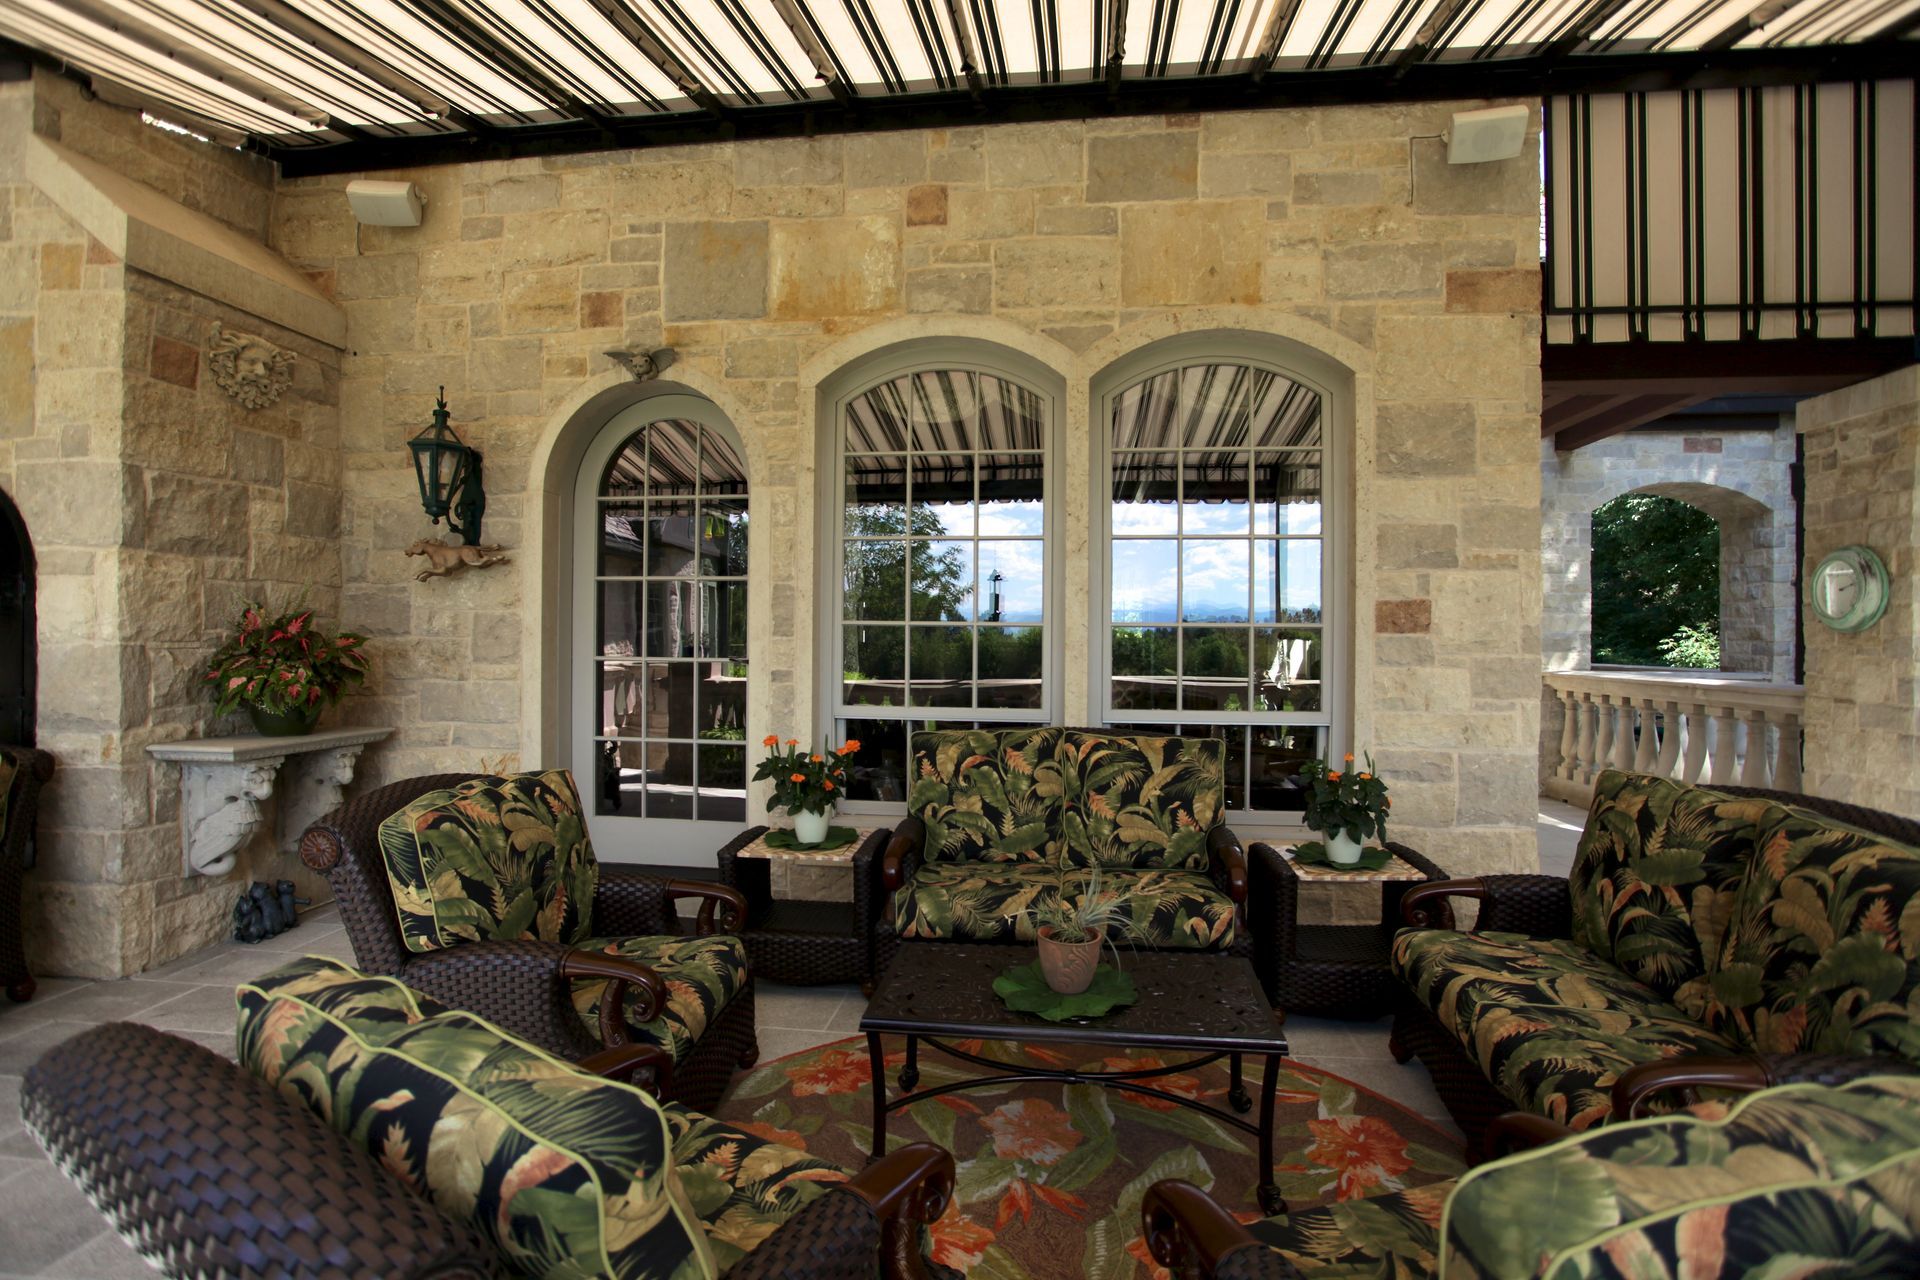 Stockman Stoneworks Designs & Installs Stunning Manufactured Stone Veneer to Homes & Businesses.